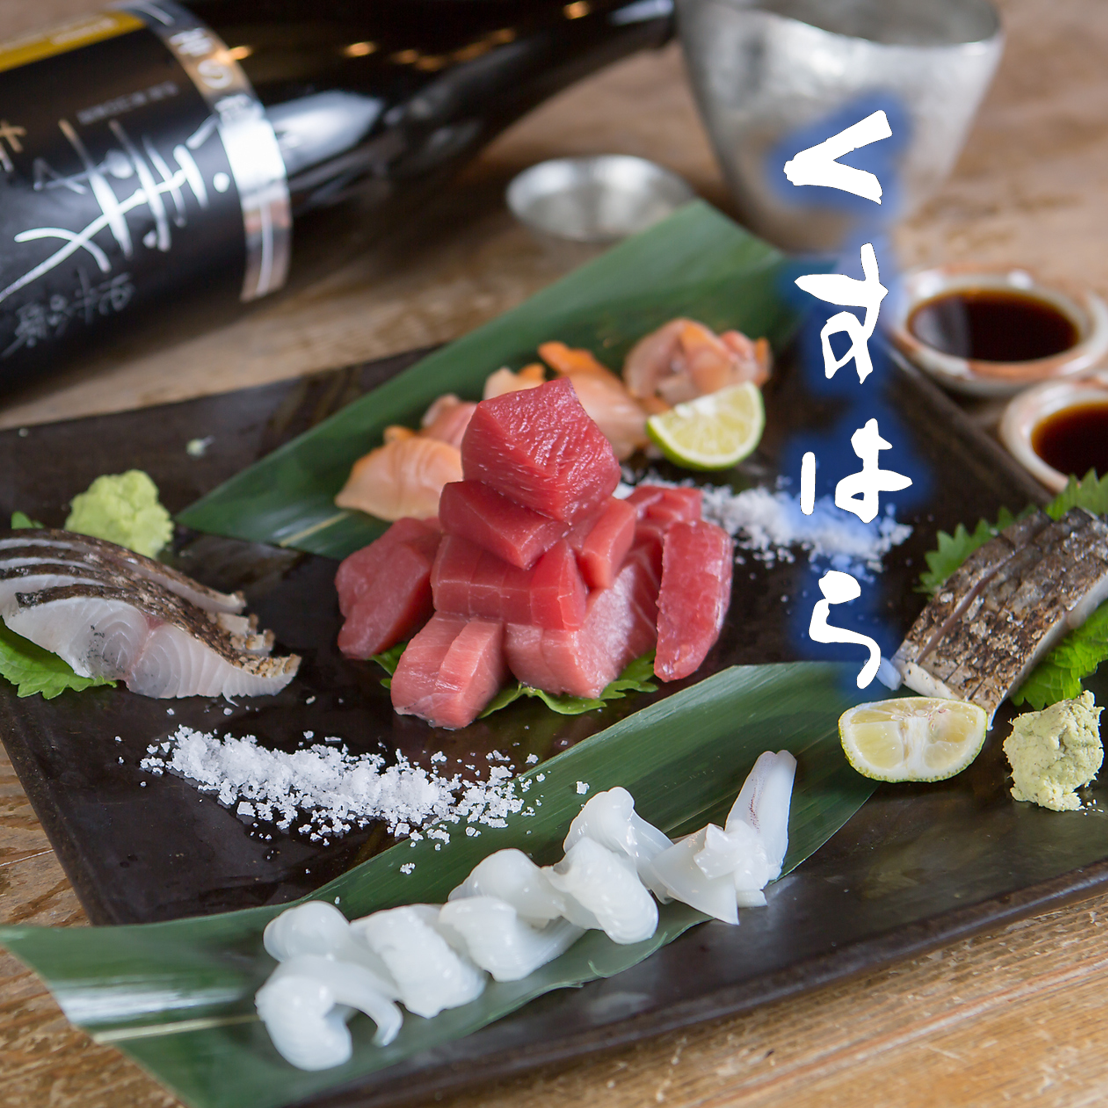 A hideaway izakaya for adults where you can relax and enjoy fresh fish, vegetables, Japanese beef, and sake in a calm space.